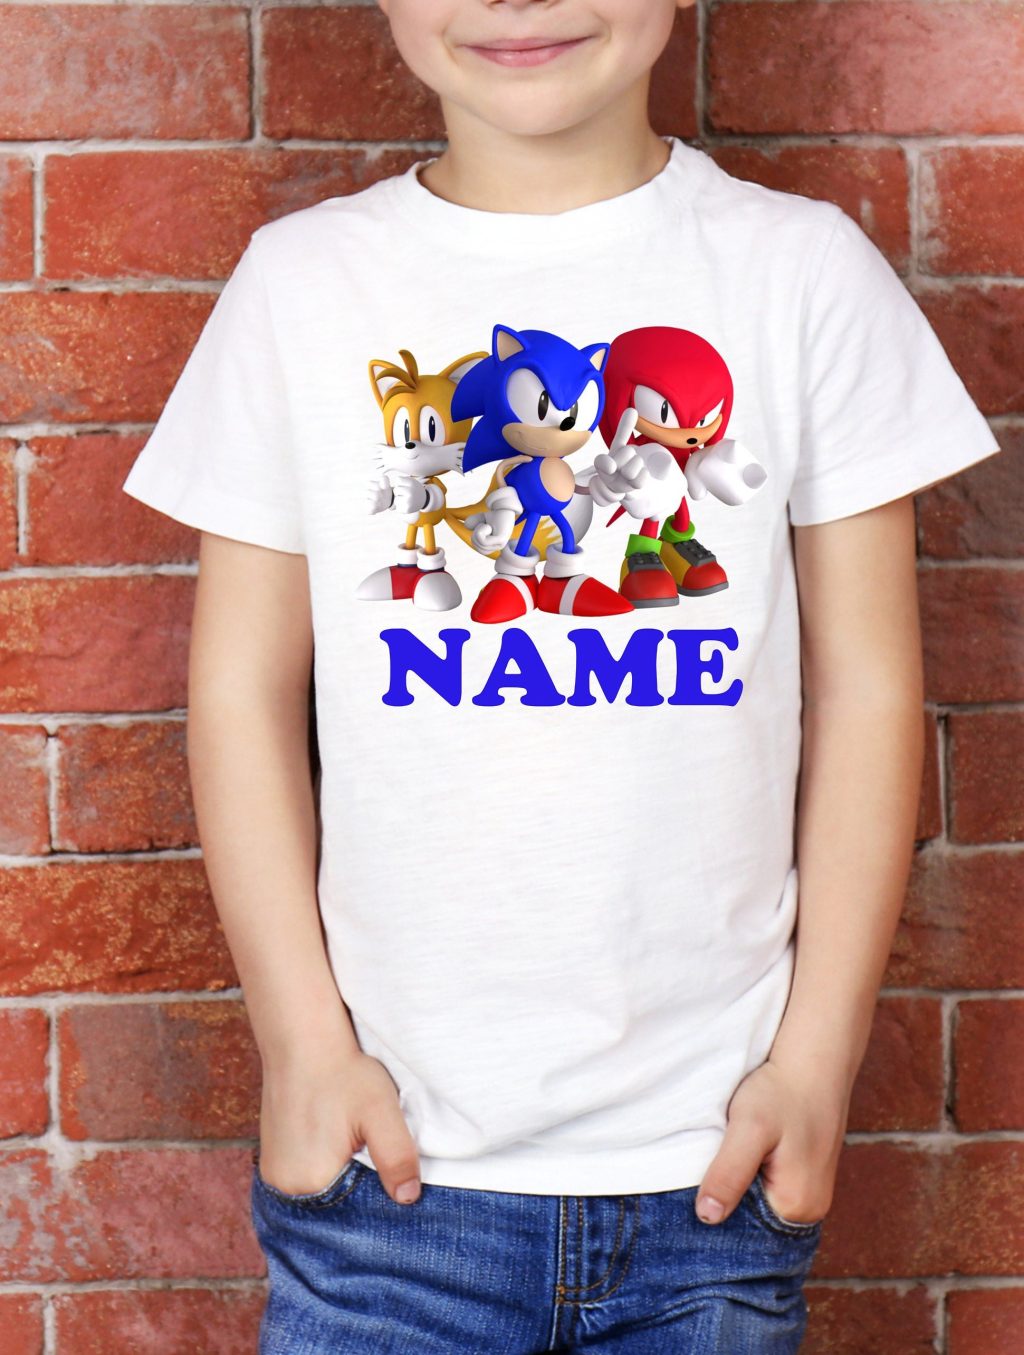 il fullxfull.5165191485 dy44 scaled - Sonic Merch Store